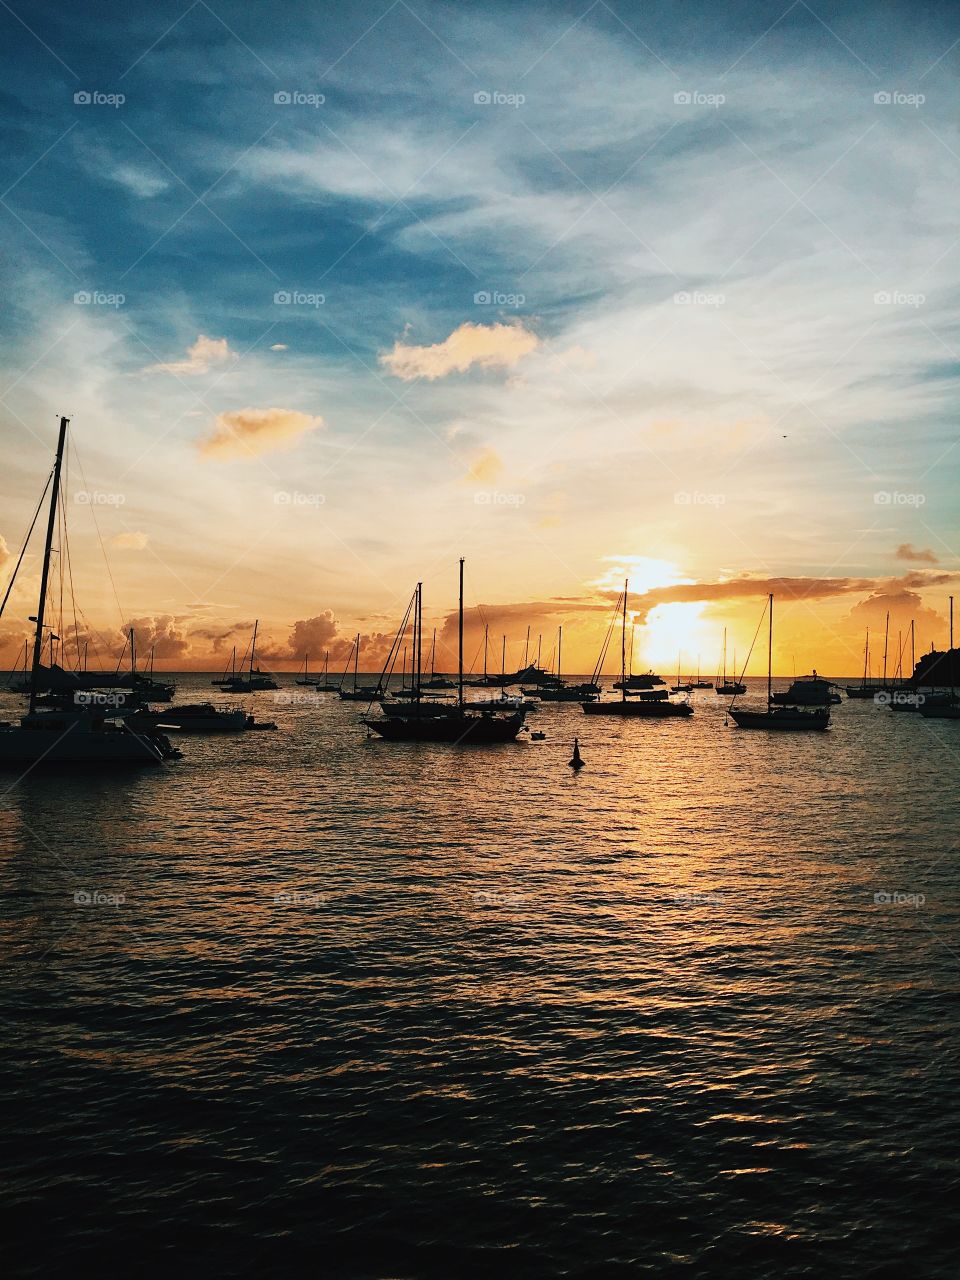 Silhouettes Of Boats On The Water, St. Barts Ships On The Sea, Ships On The Sea, Sailboats On The Water, Sailboats Off Shore, Caribbean Sailboats, Sunset With Sailboats, Silhouettes On The Sea, Sunsets And Silhouettes 